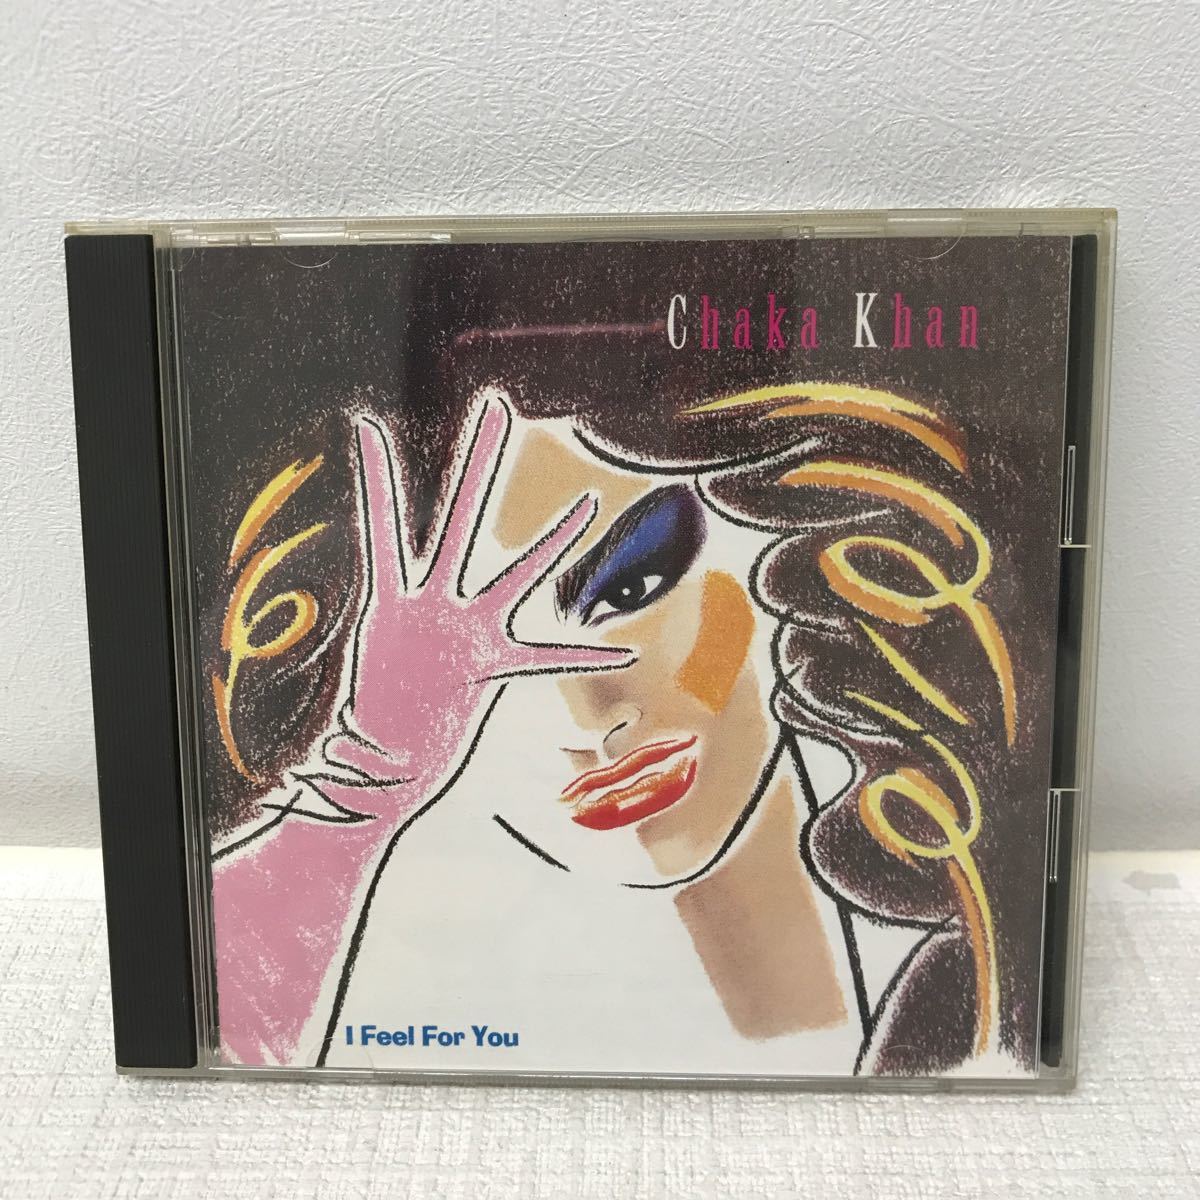 I0106D3 チャカ・カーン フィール・フォー・ユー Chaka Khan I Feel For You CD 洋楽 音楽 / THIS IS MY NIGHT / EYE TO EYE 他_画像1